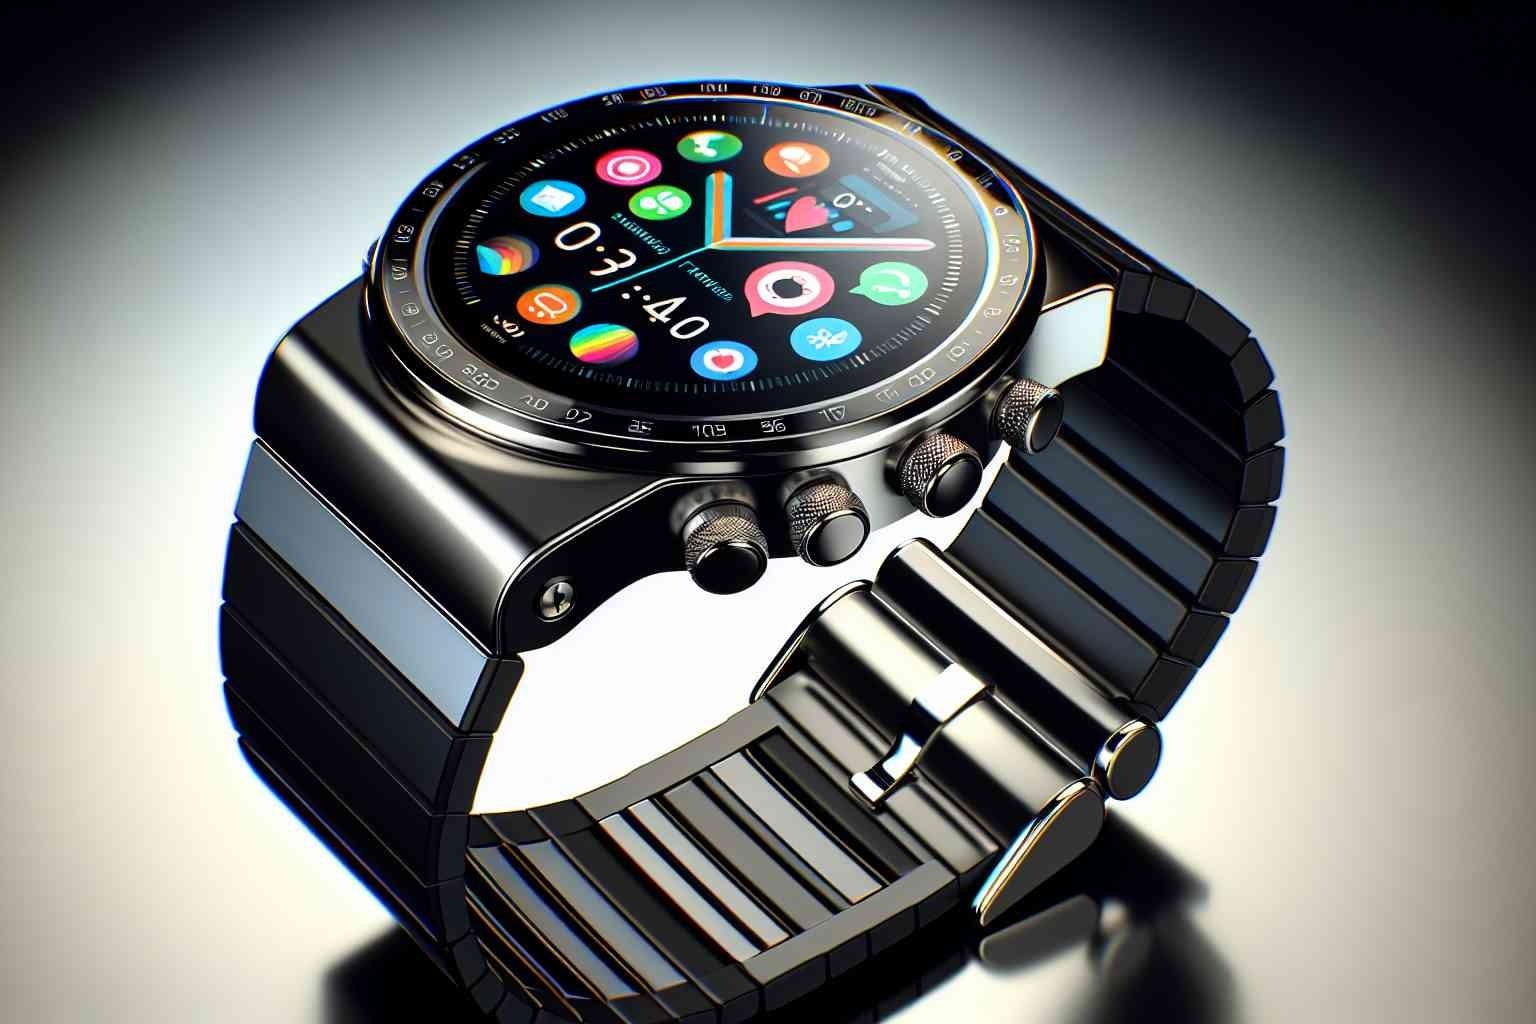 powering-up-your-itouch-smartwatch-step-by-step-guide